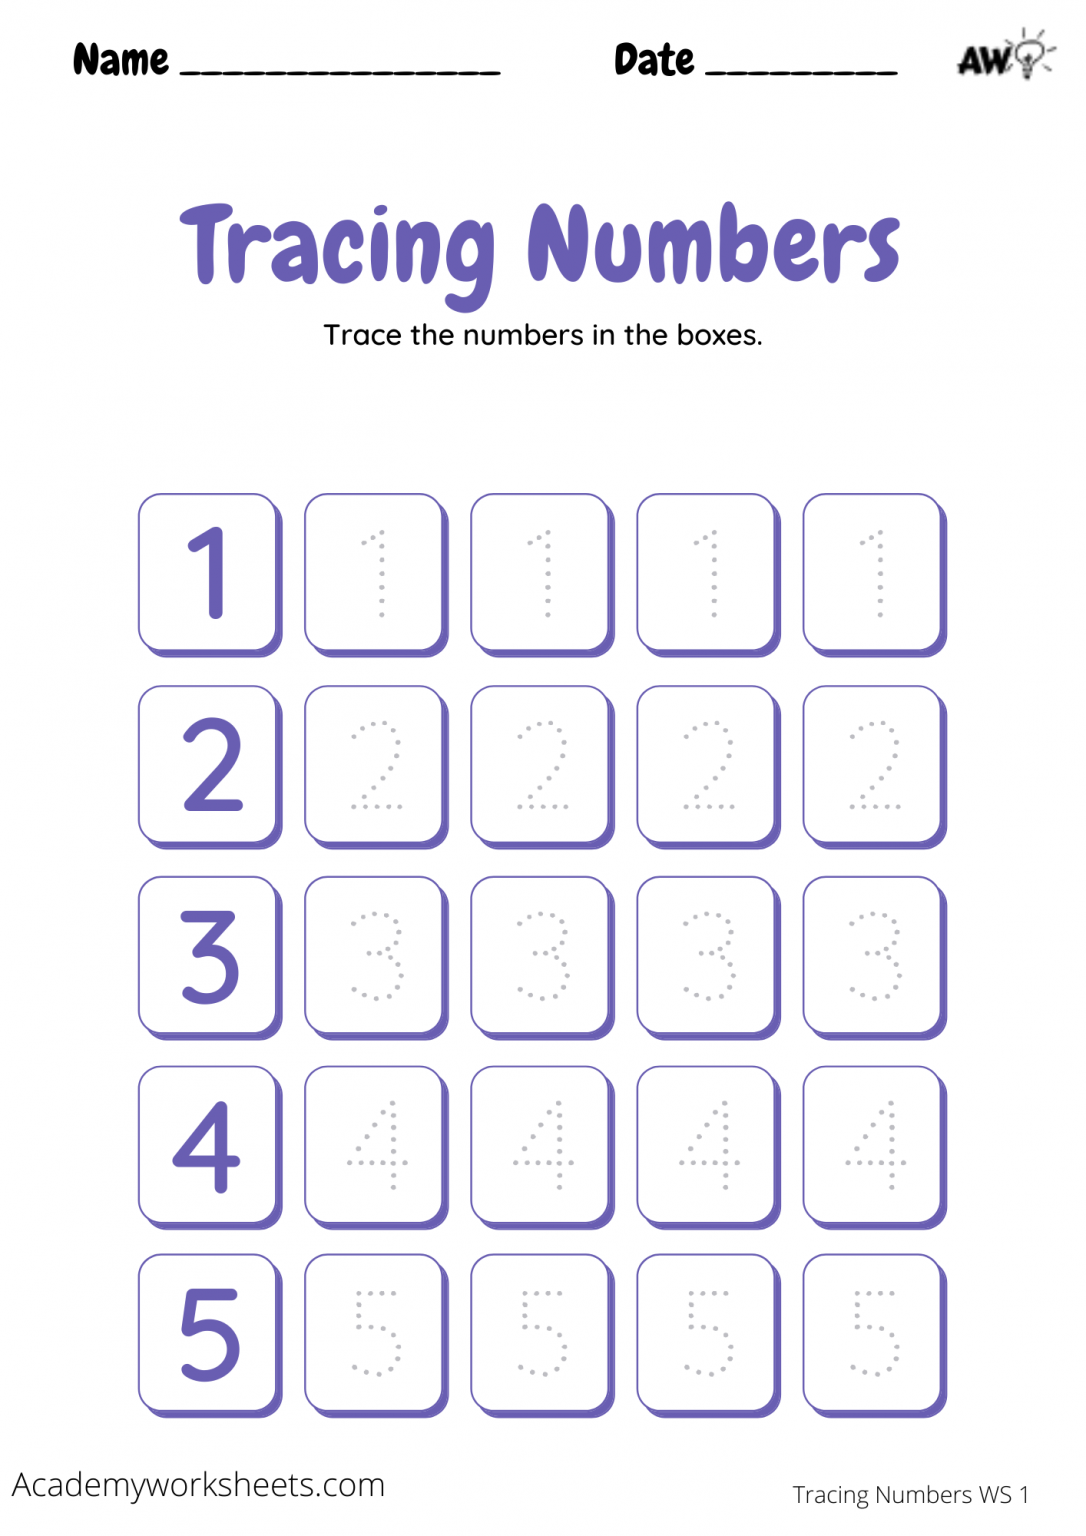 tracing-numbers-1-5-academy-worksheets